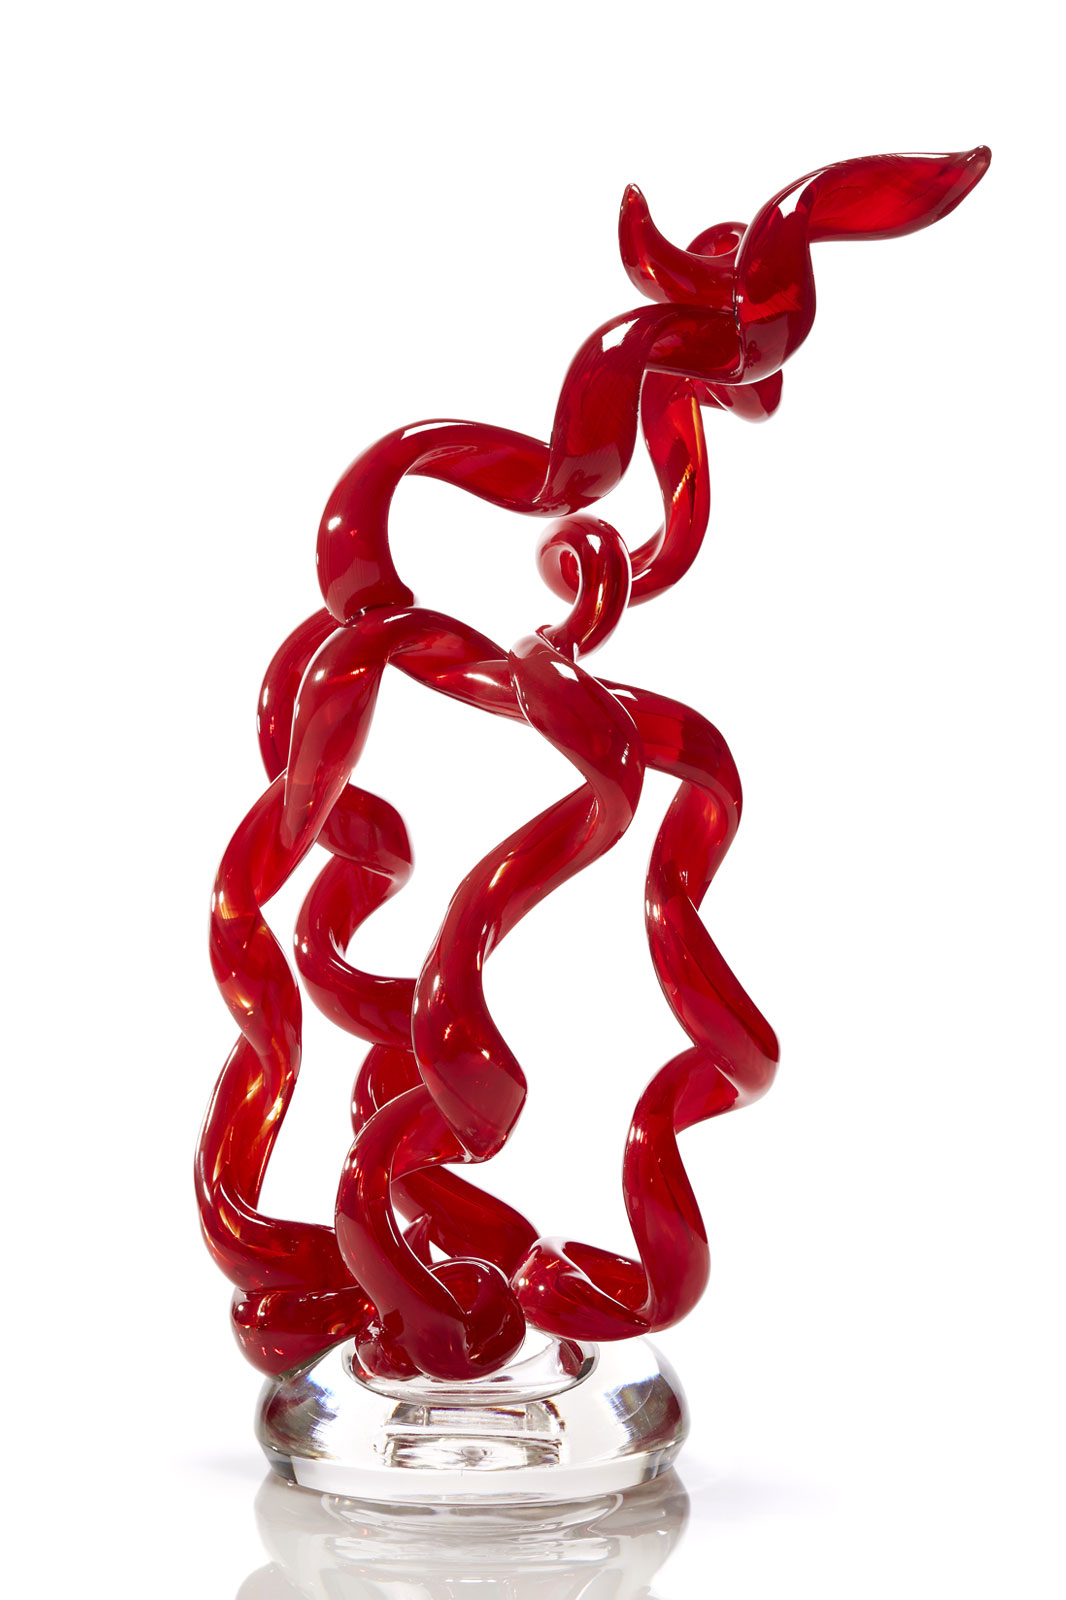 Dale Chihuly, Rotolo 80, 2018